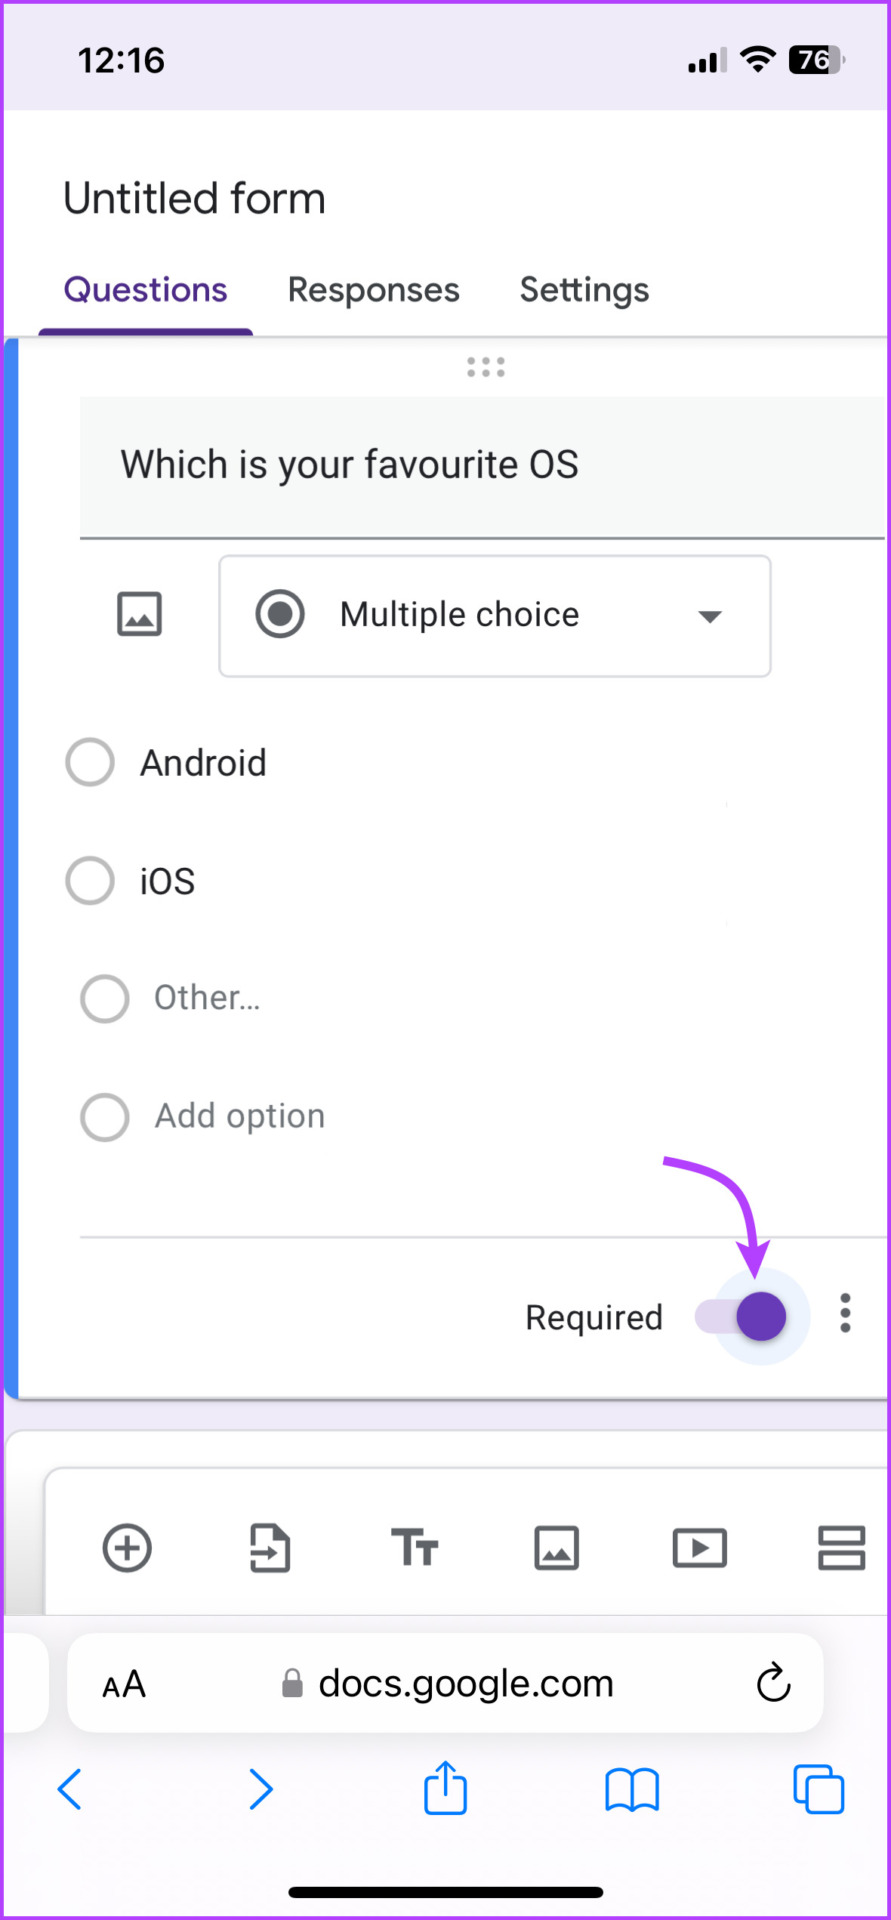 Toggle on Required to make questions compulsory in Google Forms